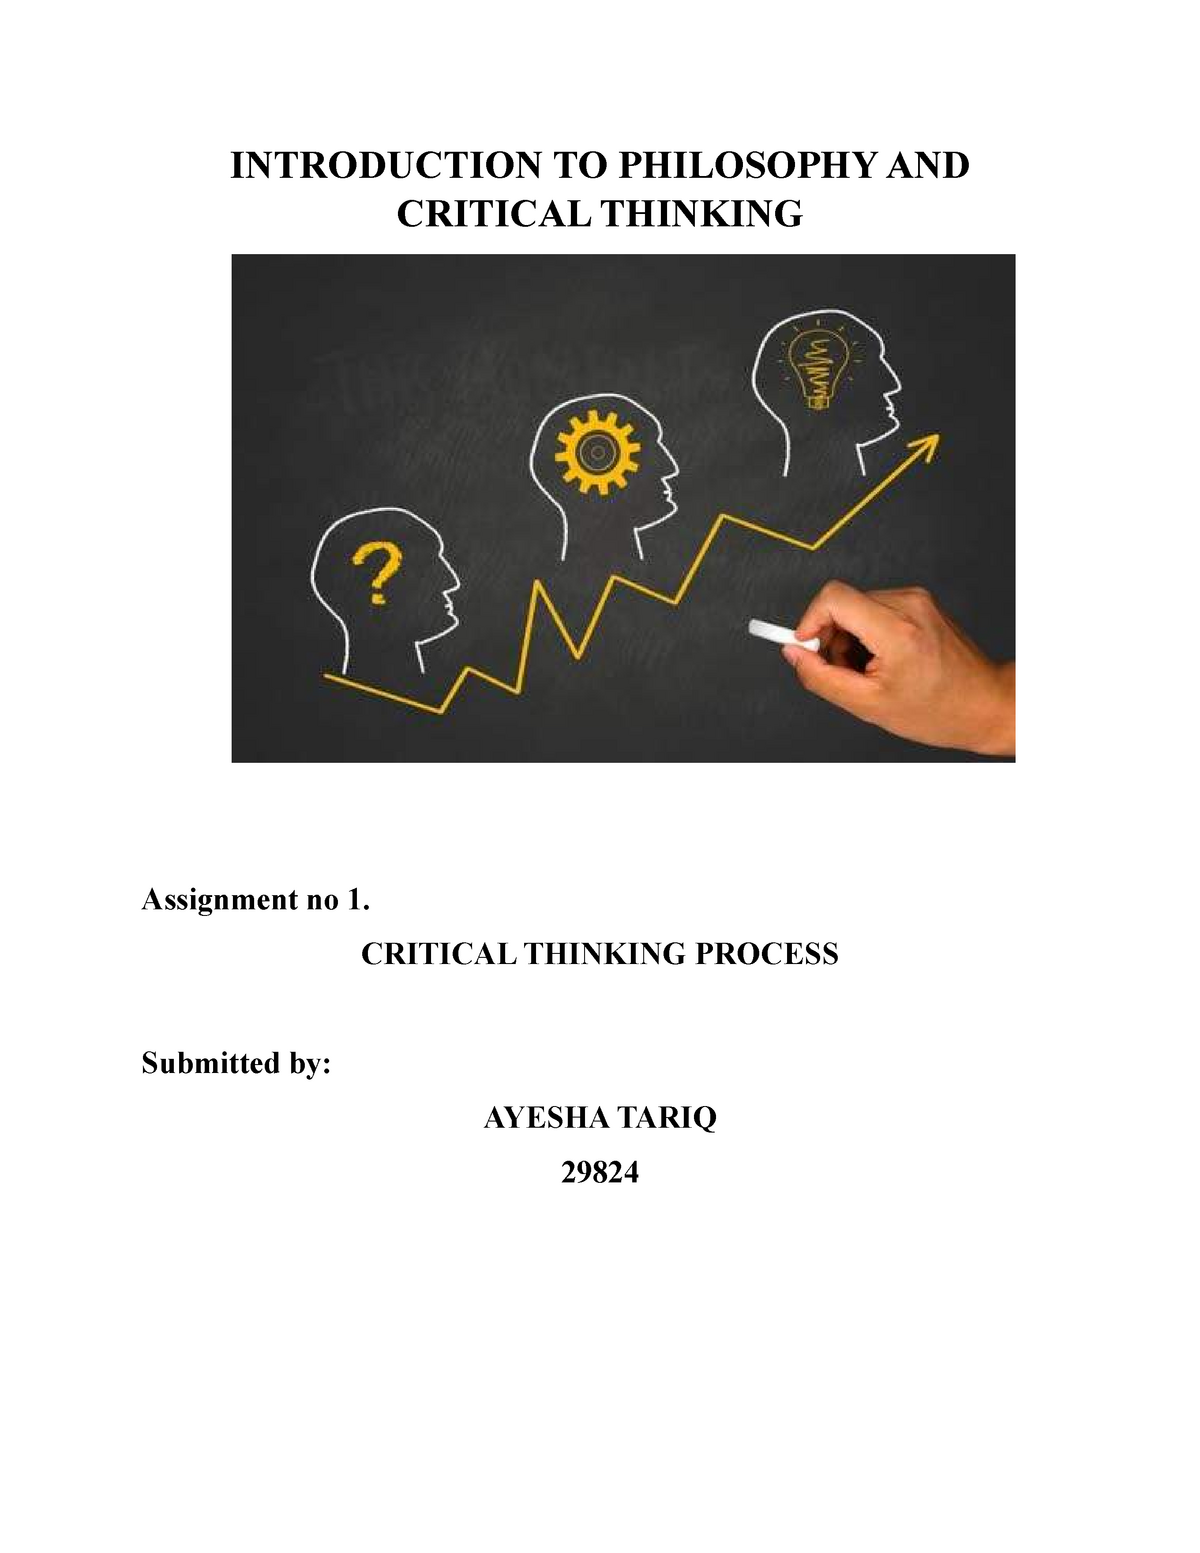 critical thinking and philosophy pdf